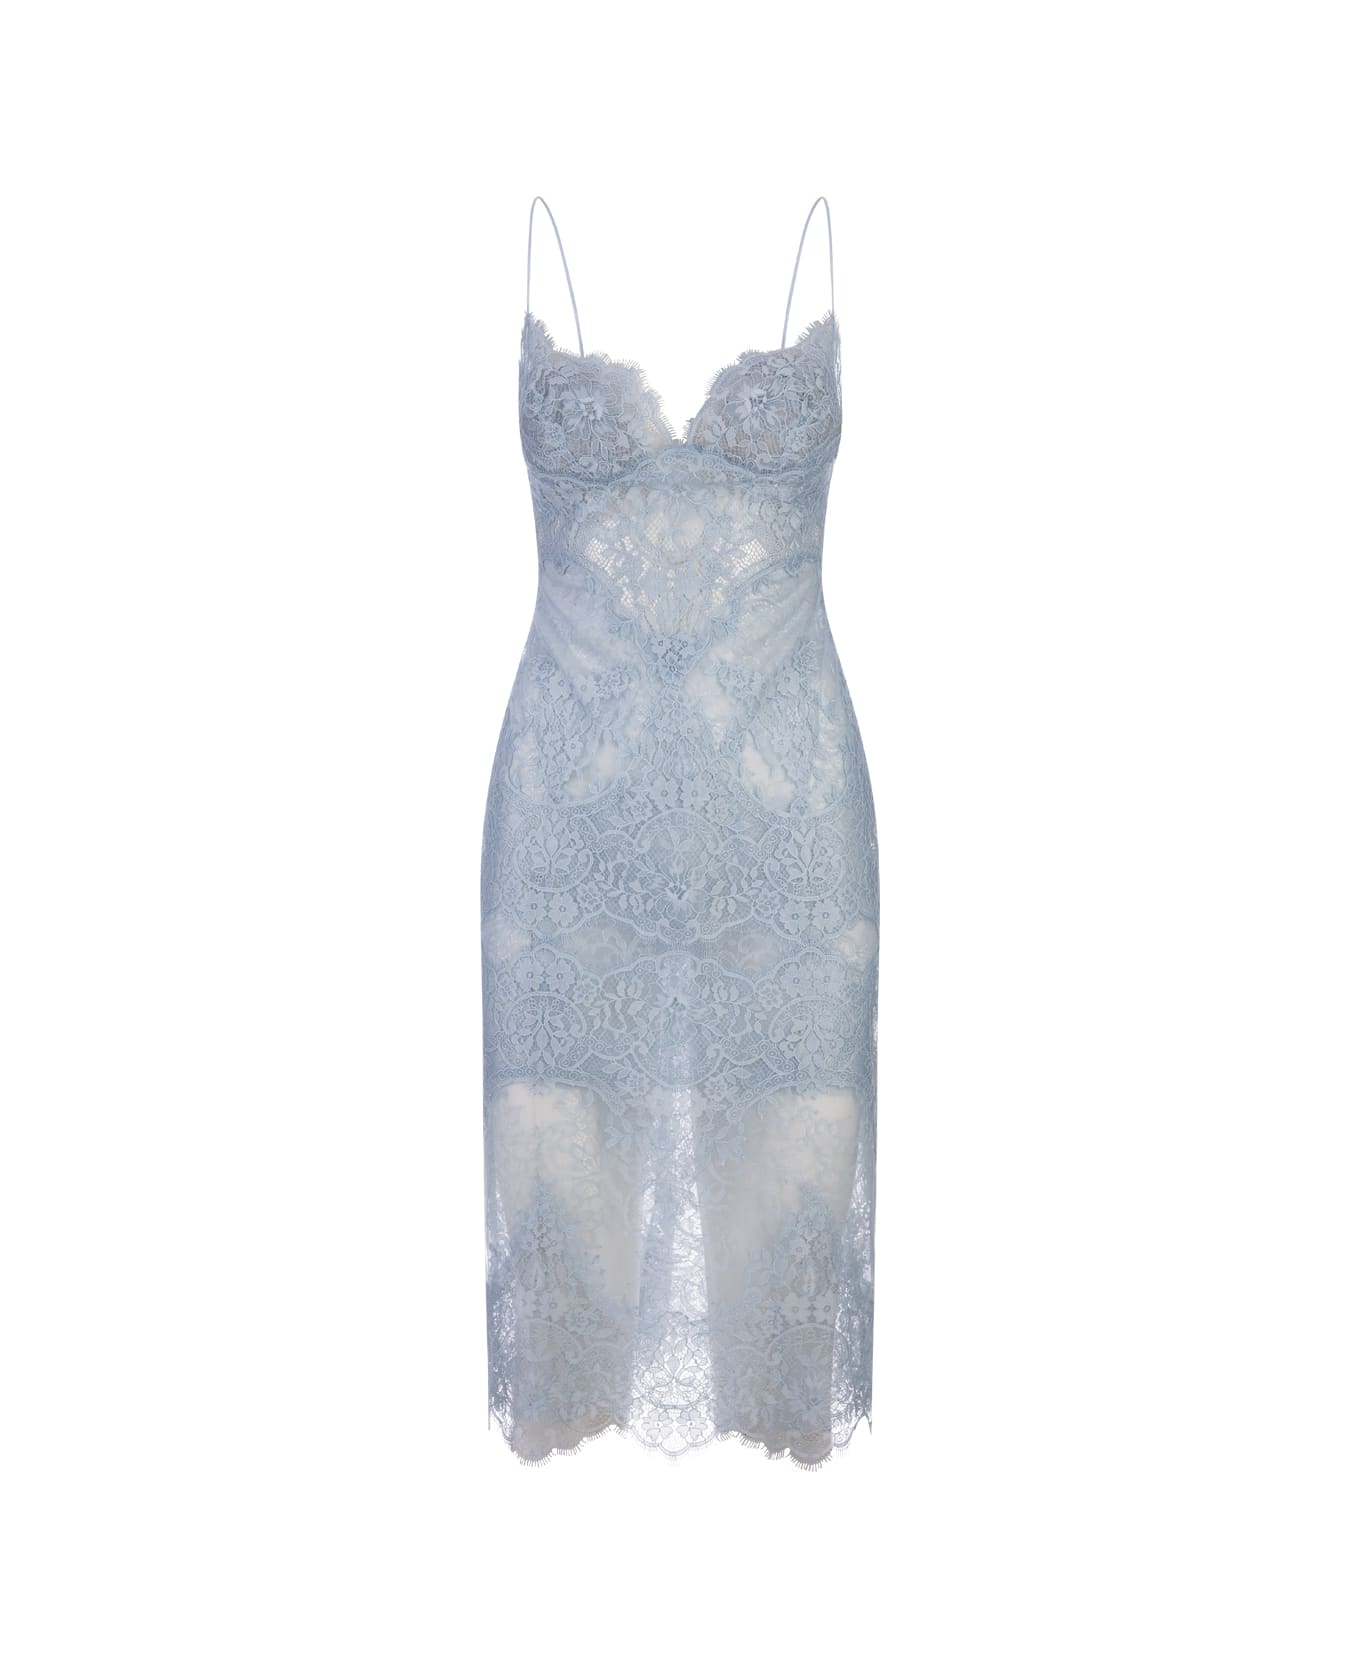 Ermanno Scervino All-over Light Blue Lace Lingerie Dress - Blue ランジェリー＆パジャマ